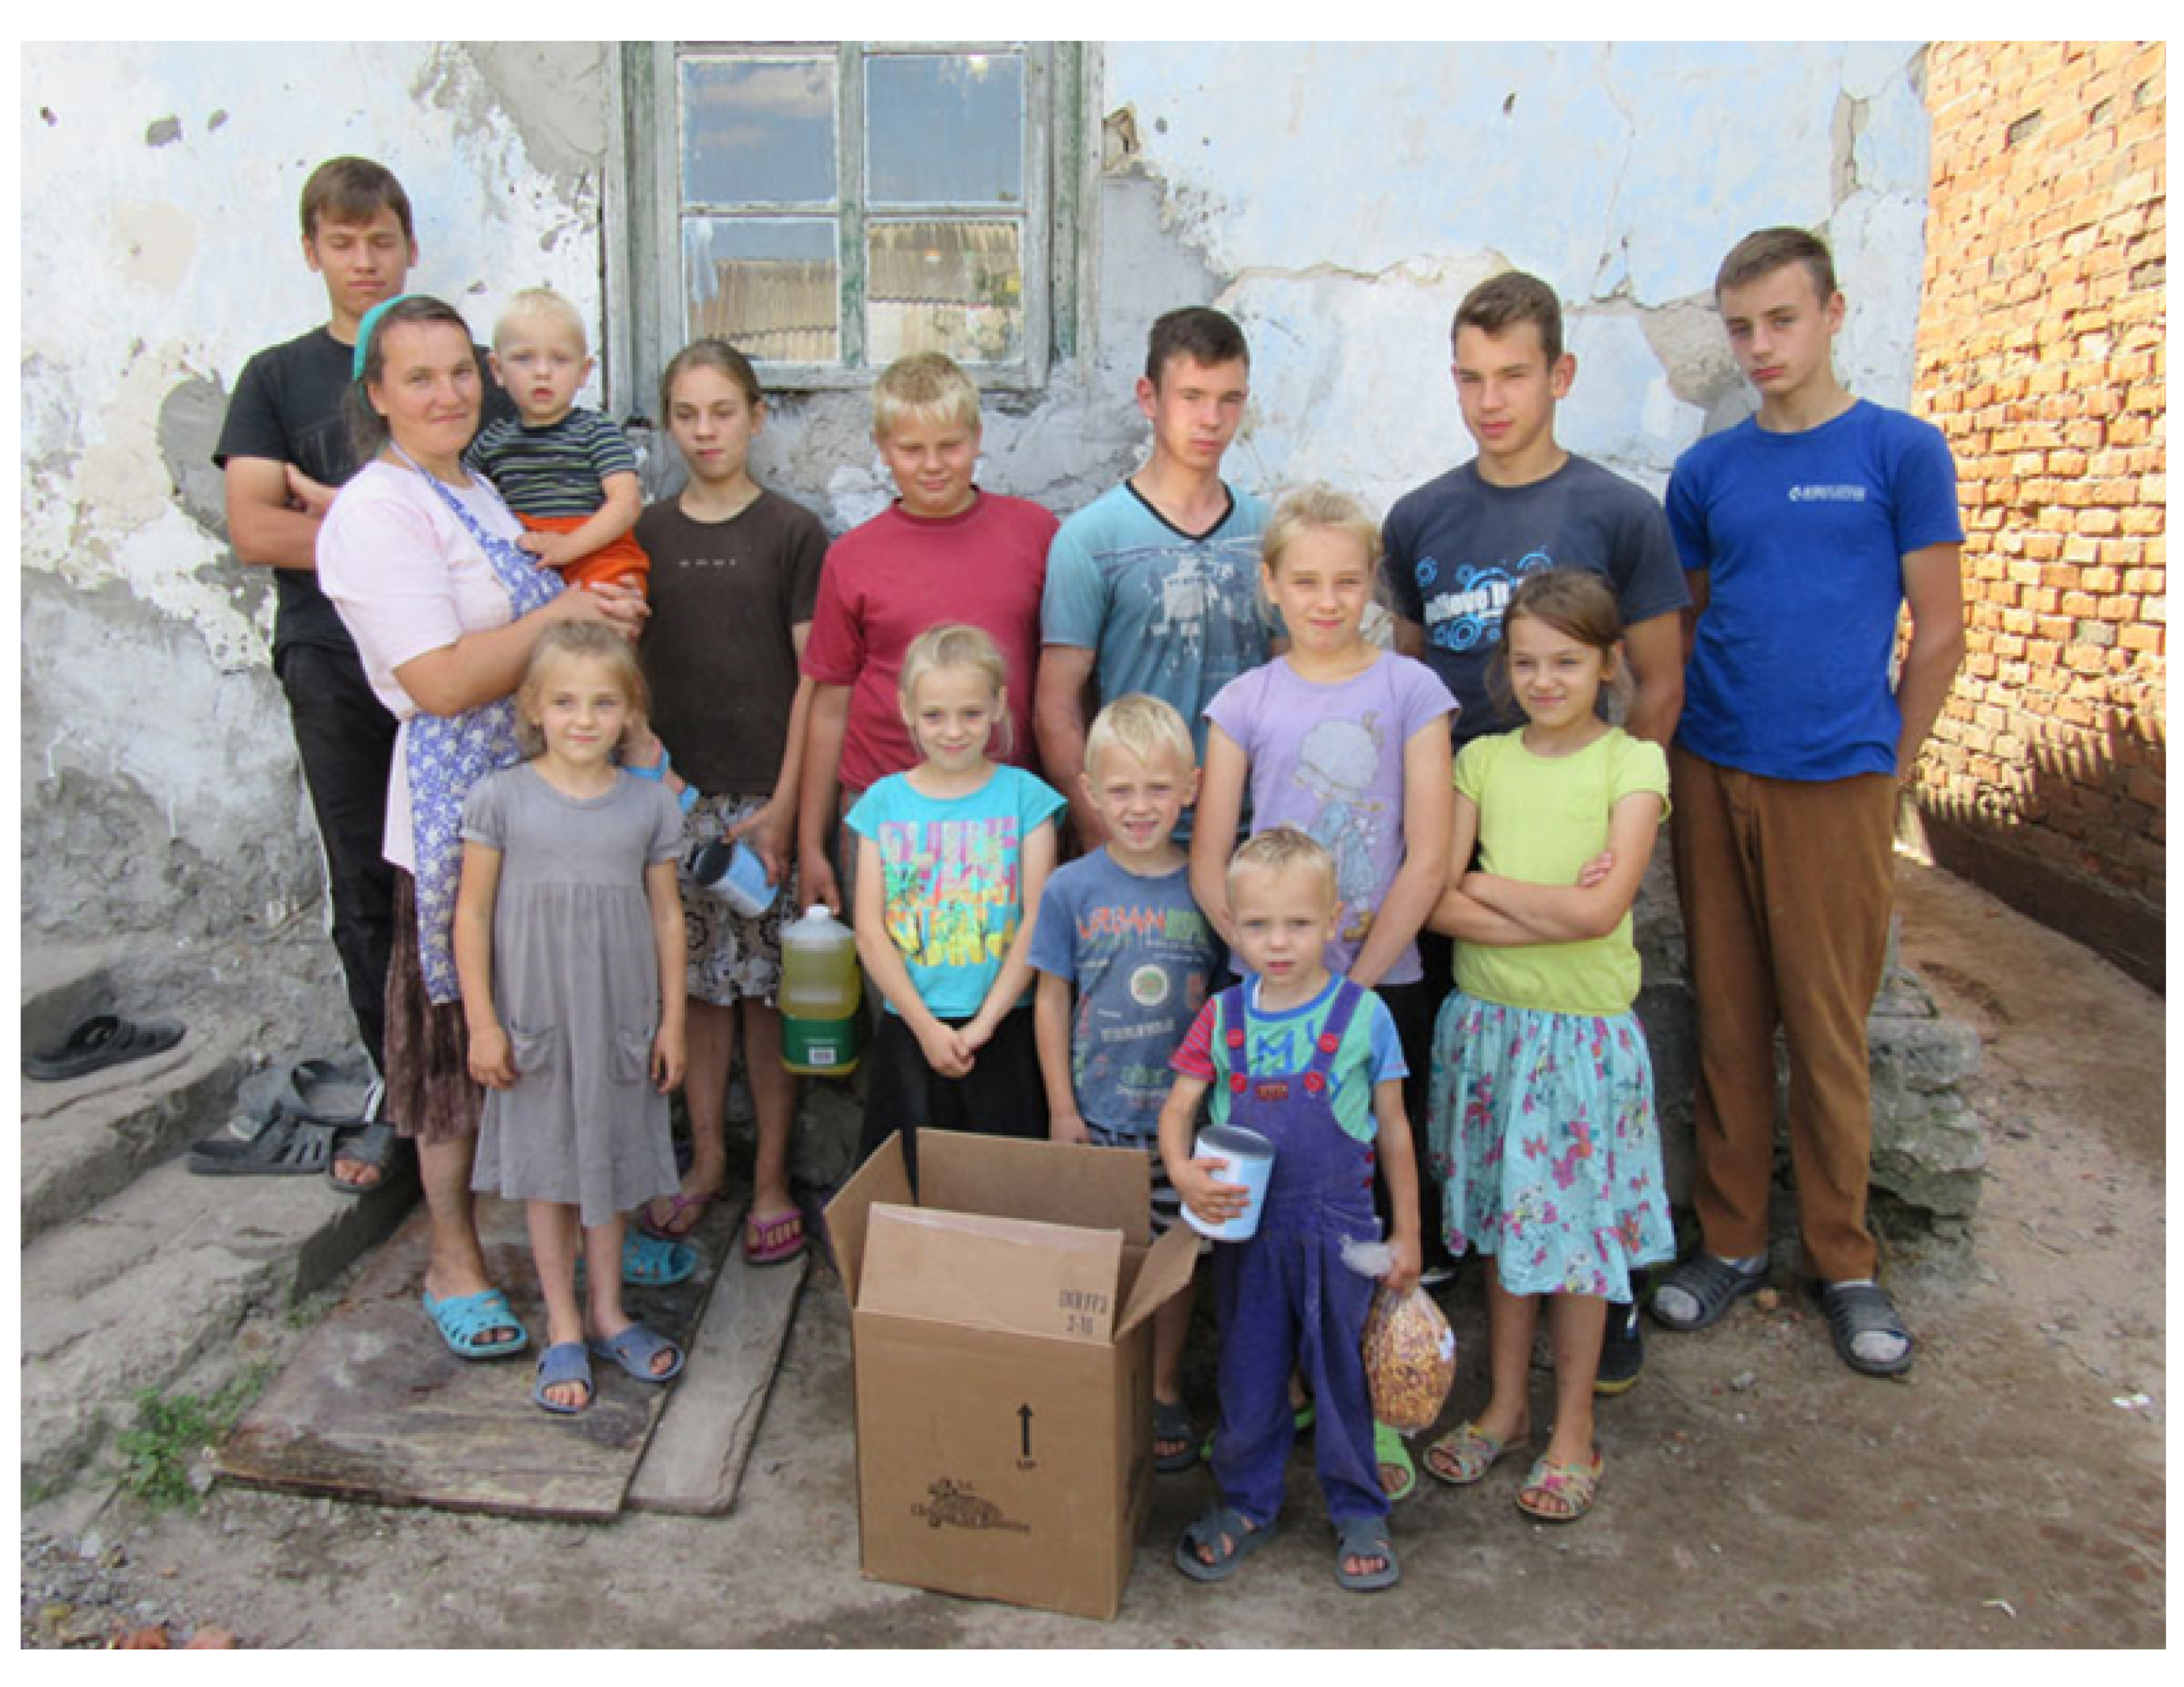 Food Parcels Bless Hardworking Family of 14